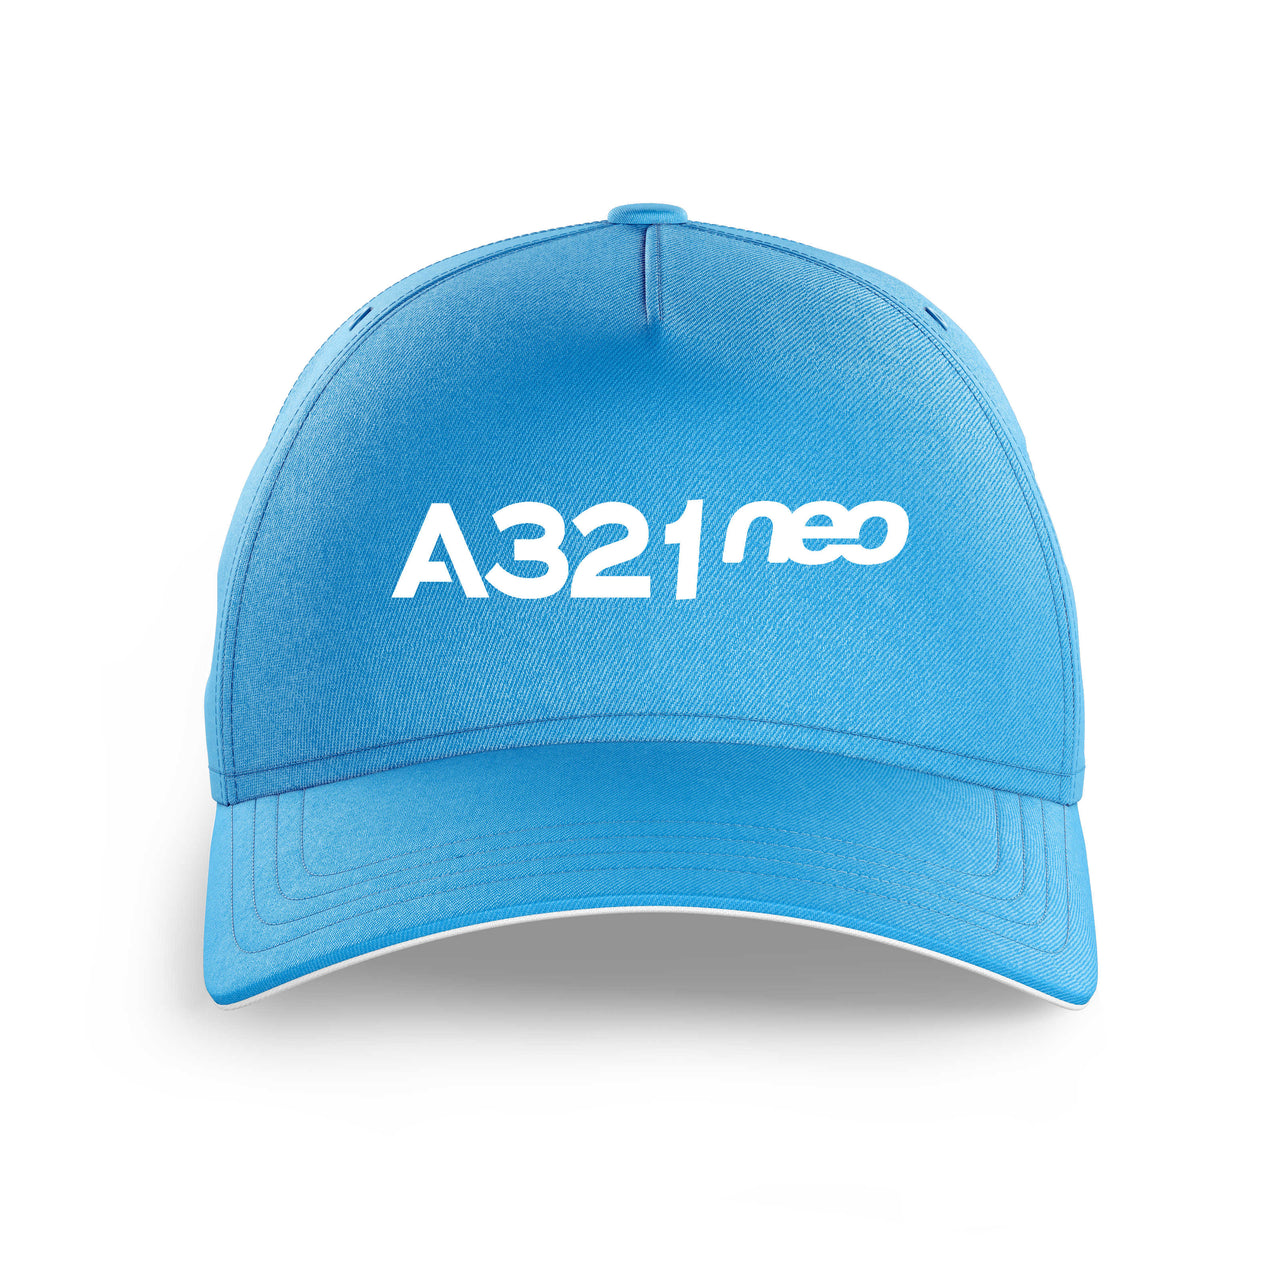 A321neo & Text Printed Hats